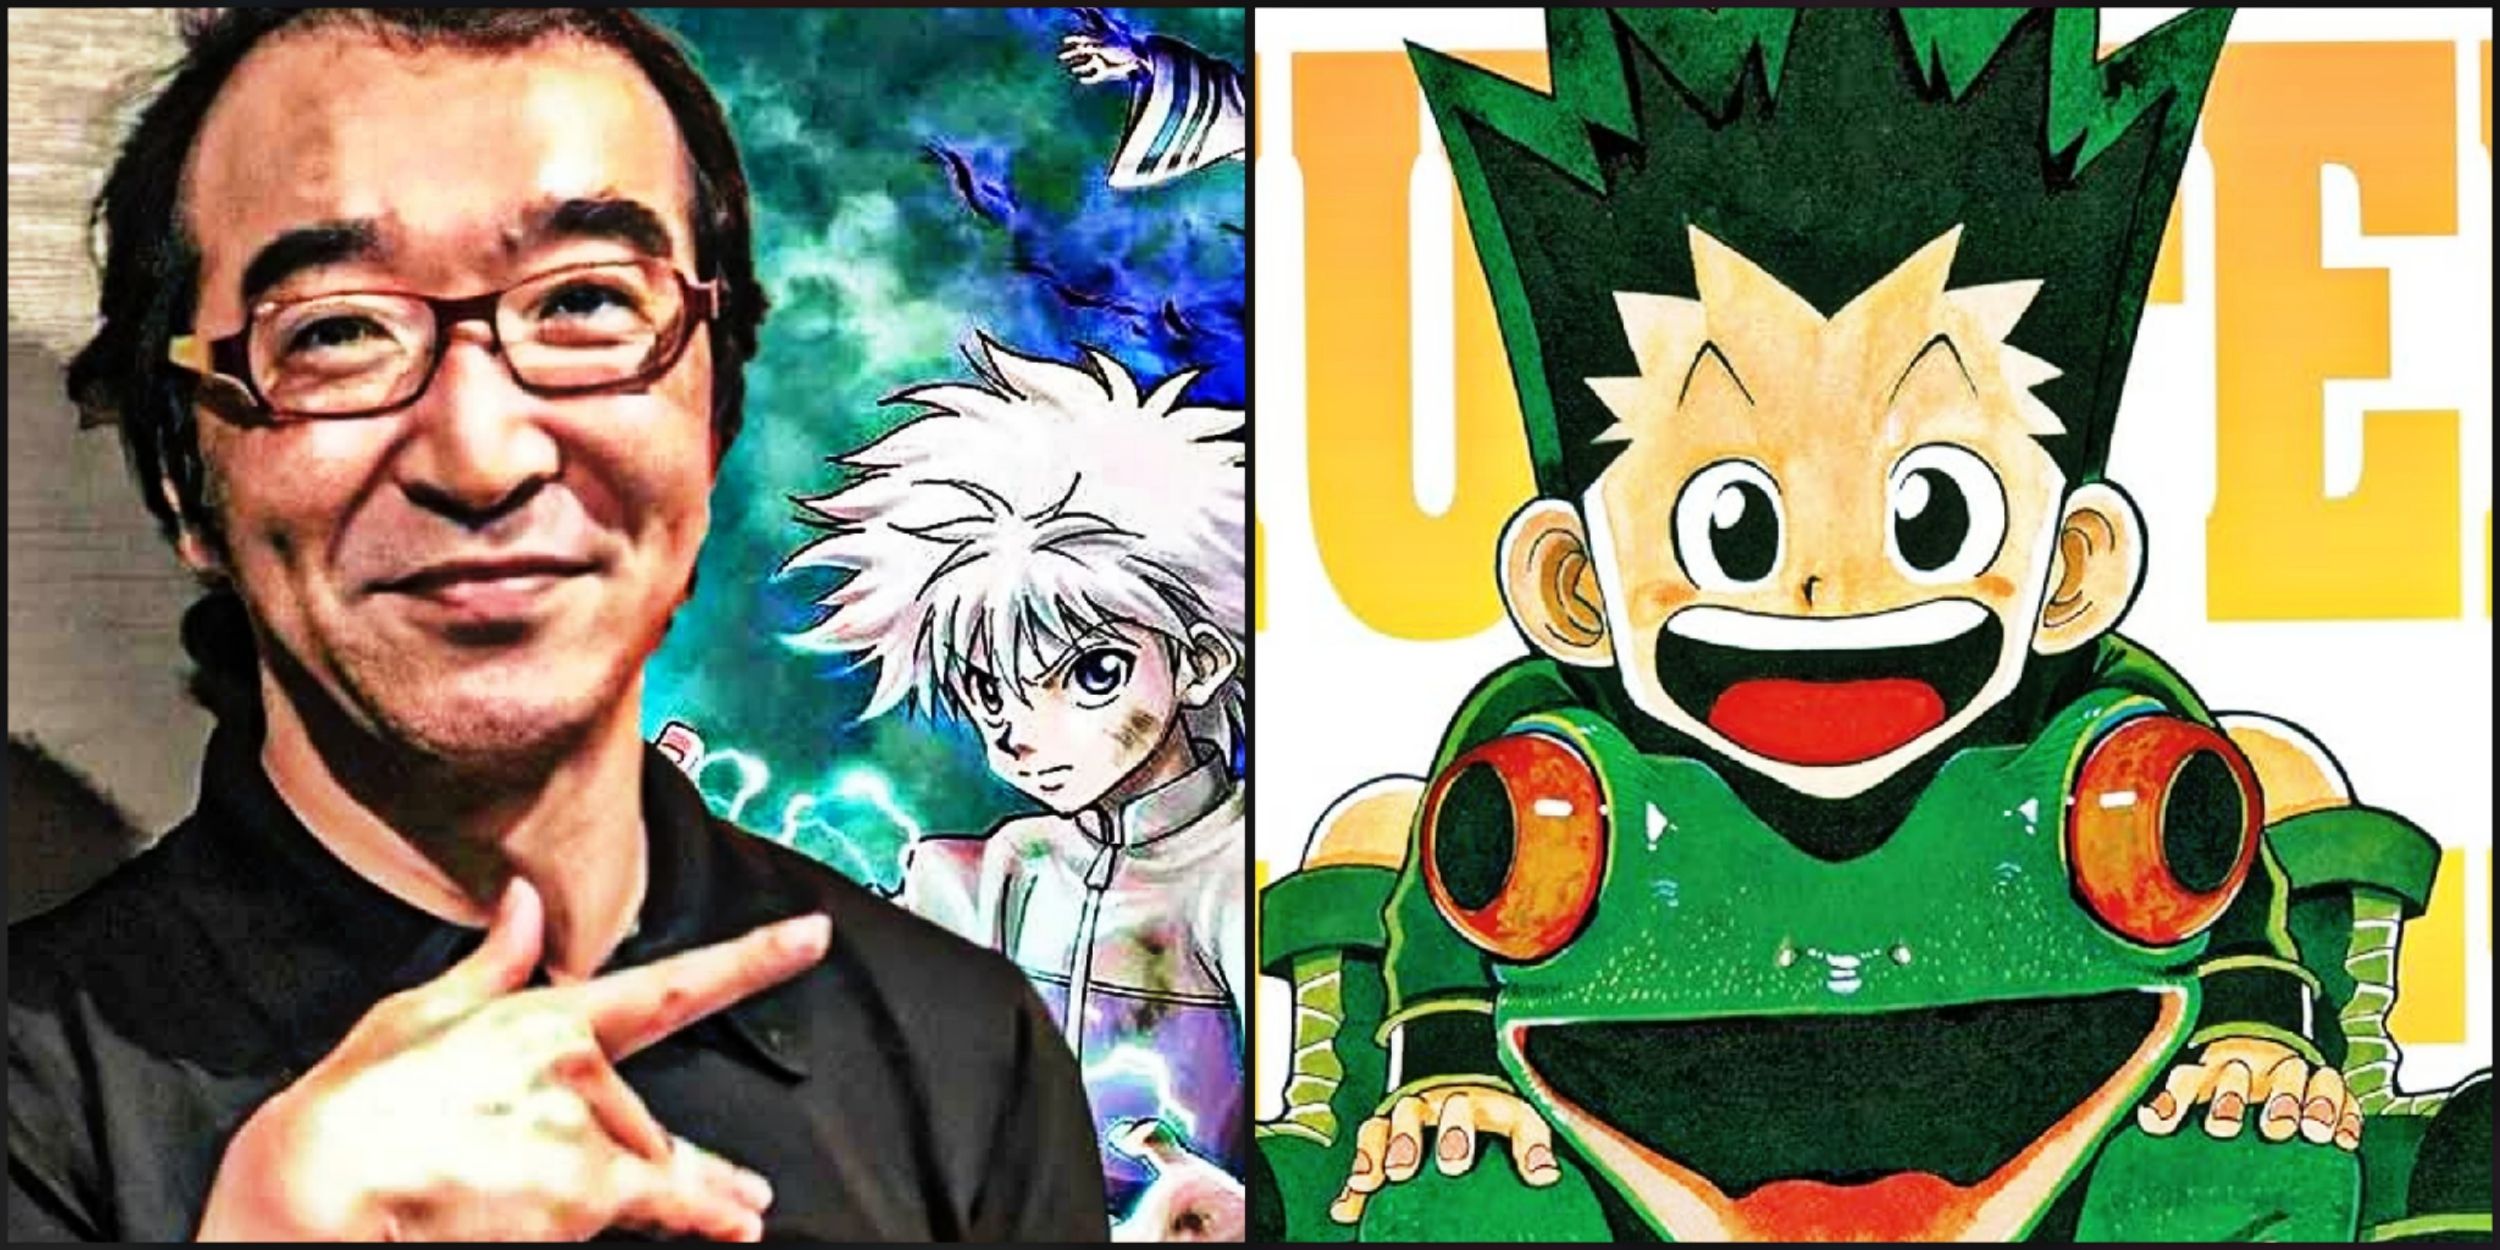 Hunter x Hunter Creator Reveals How Long Fixing a Panel Takes Now